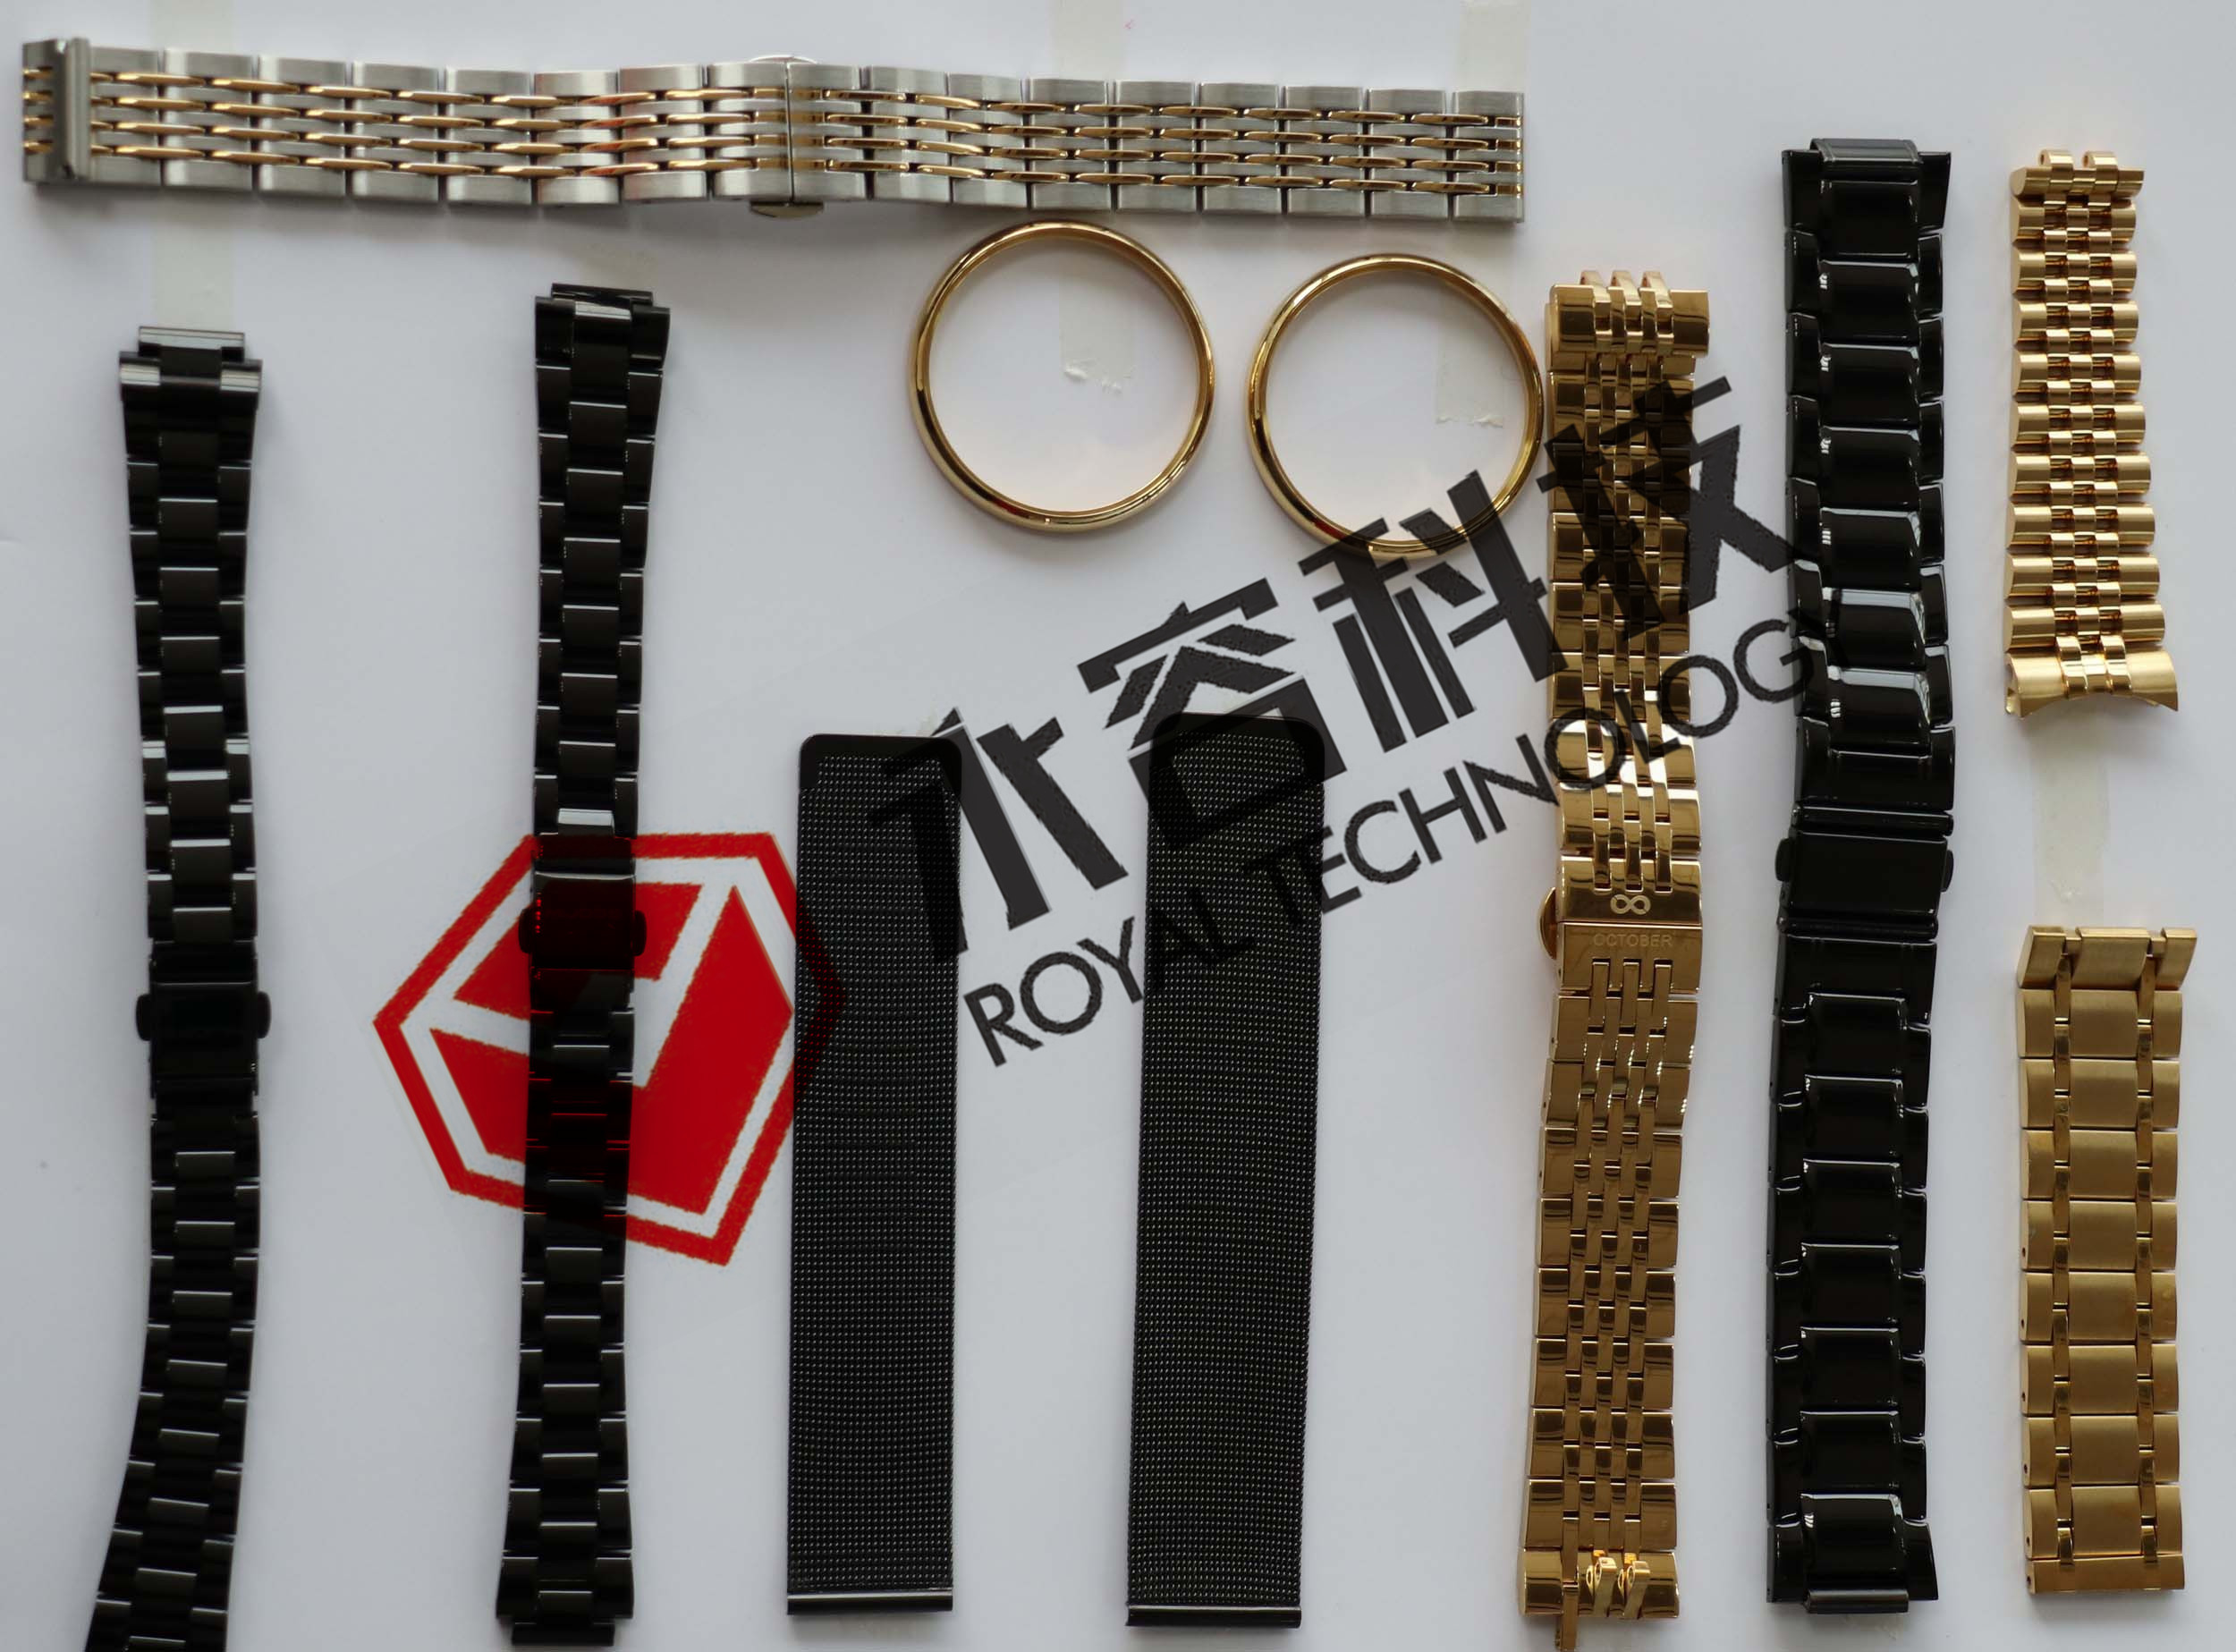 Watch Chains PVD Gold Plating, High Reflective  Thin Film Plating Machine For Watch Parts IPG Gold / Black Coating